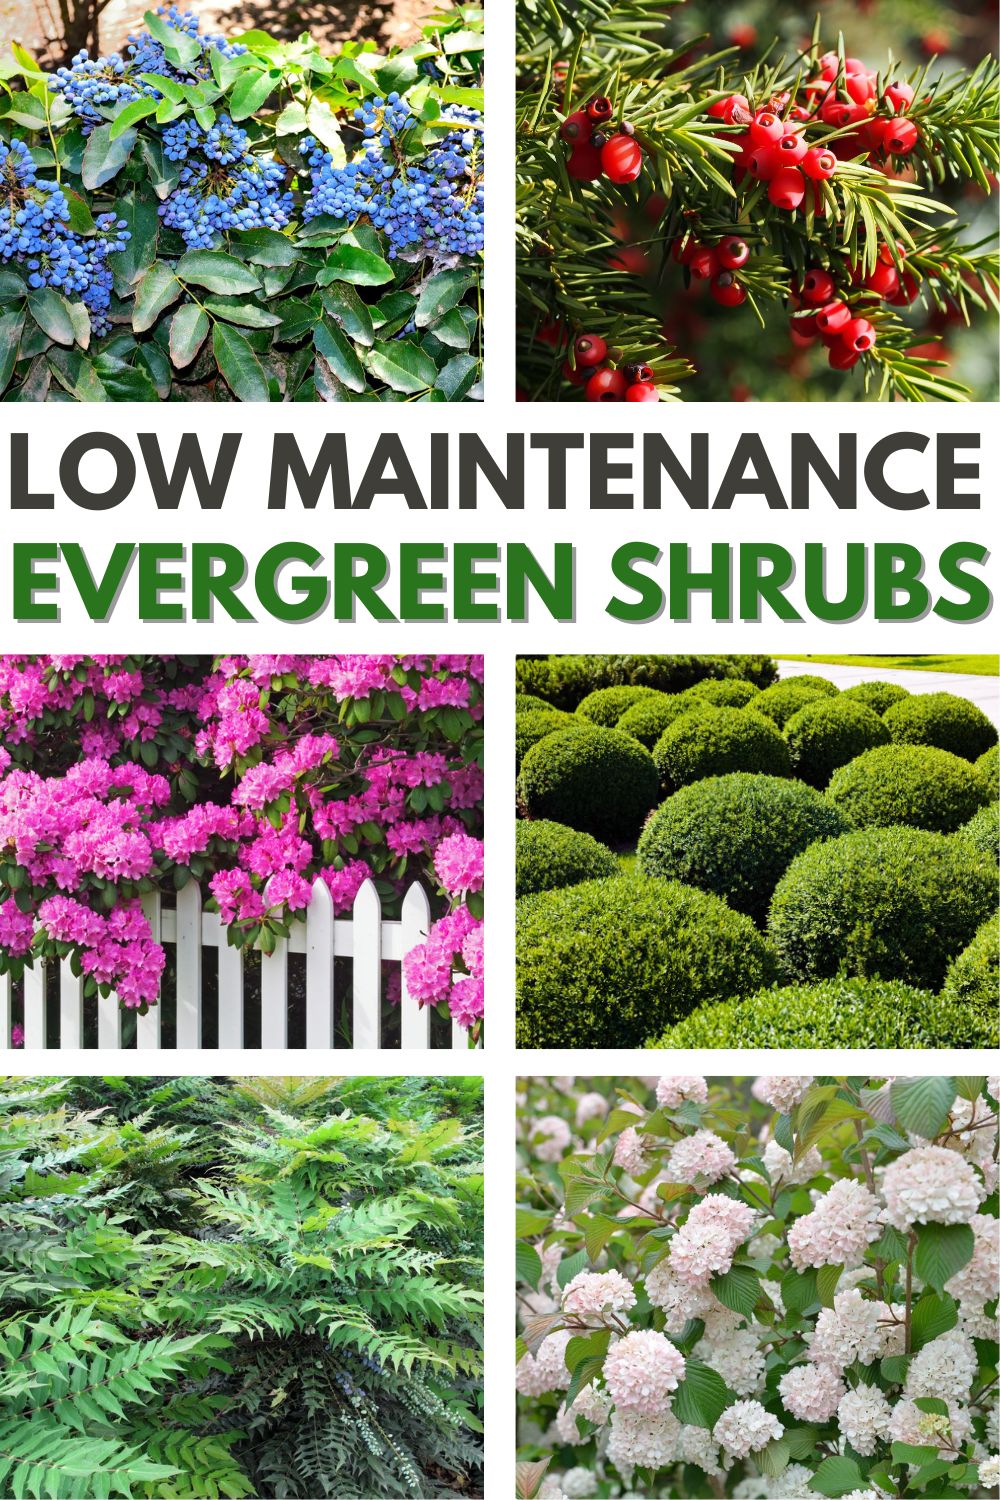 Low maintenance evergreen shrubs will add some greenery and texture to your landscape without the hassle of constant maintenance. #lowmaintenanceevergreenshrubs #evergreens #evergreenshrubs #lowmaintenance #hedge via @wondermomwannab